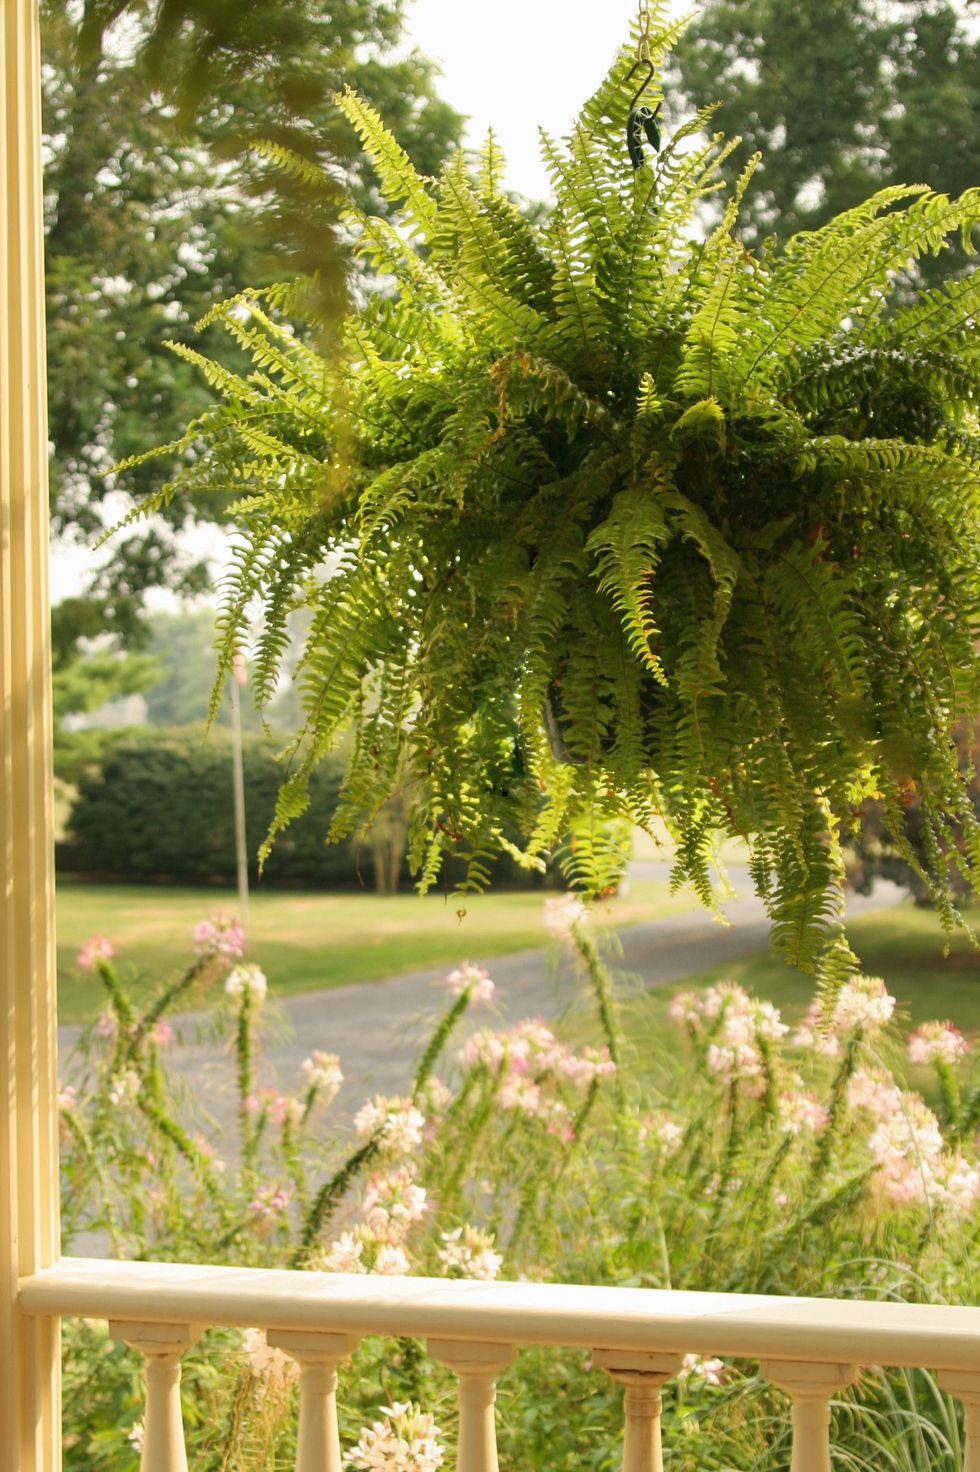 https://hips.hearstapps.com/hmg-prod/images/outdoor-hanging-plant-porch-fern-1655738504.jpeg?crop=0.891xw:0.876xh;0.109xw,0&resize=980:*